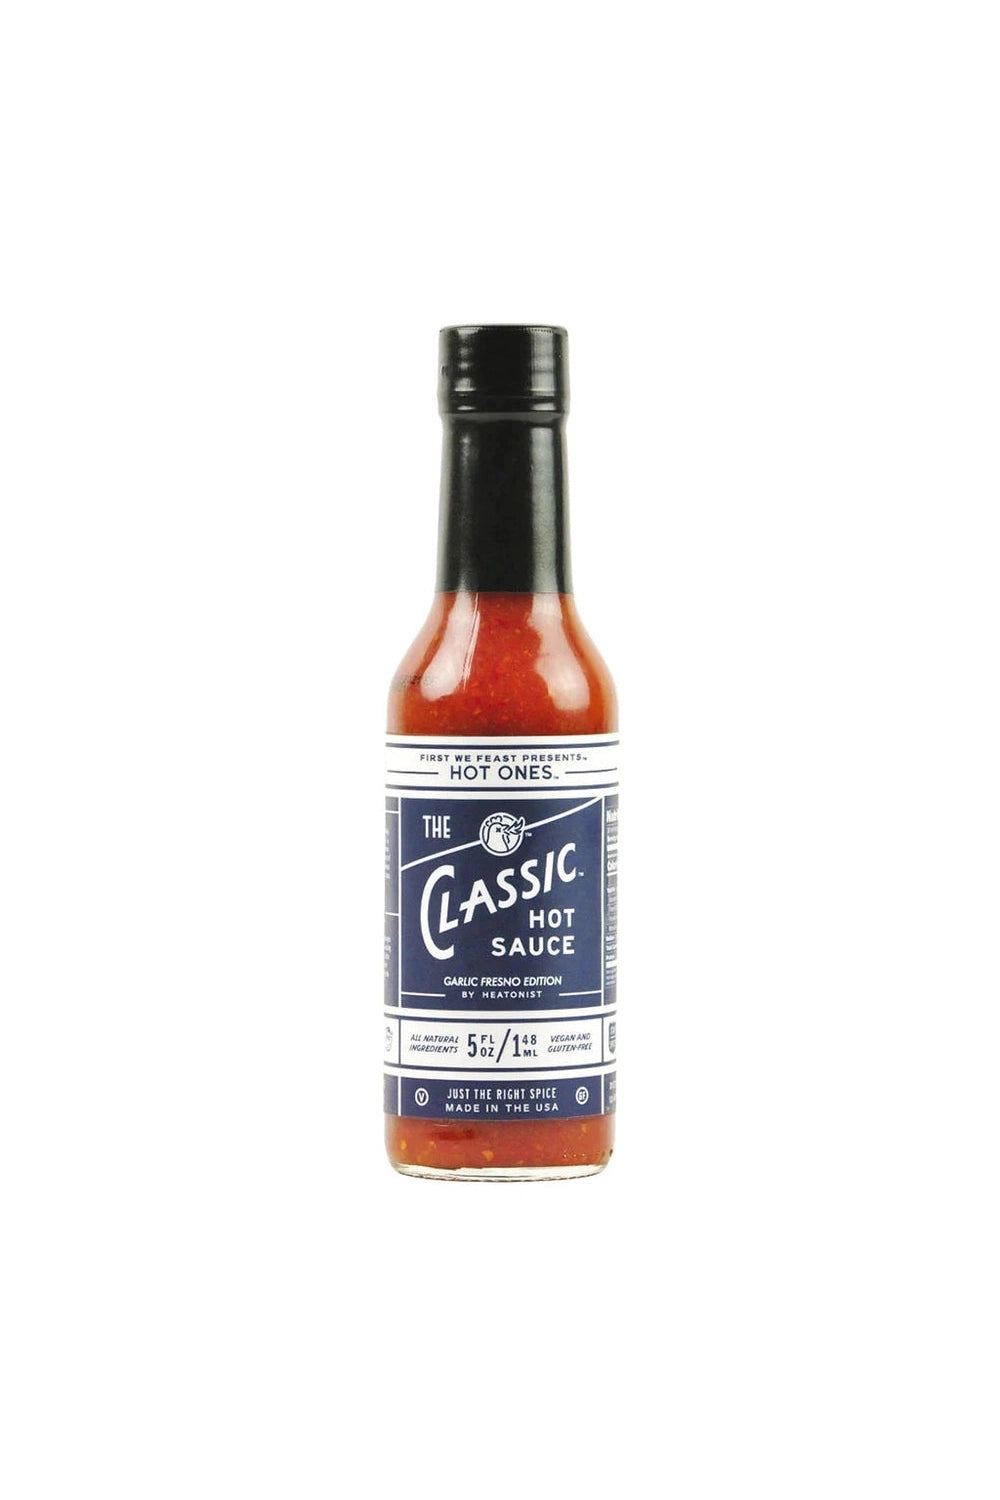 Hot Ones The Classic - Garlic Fresno Edition Hot Sauce Hot Ones Hot Sauce Chilliwack BBQ Supply